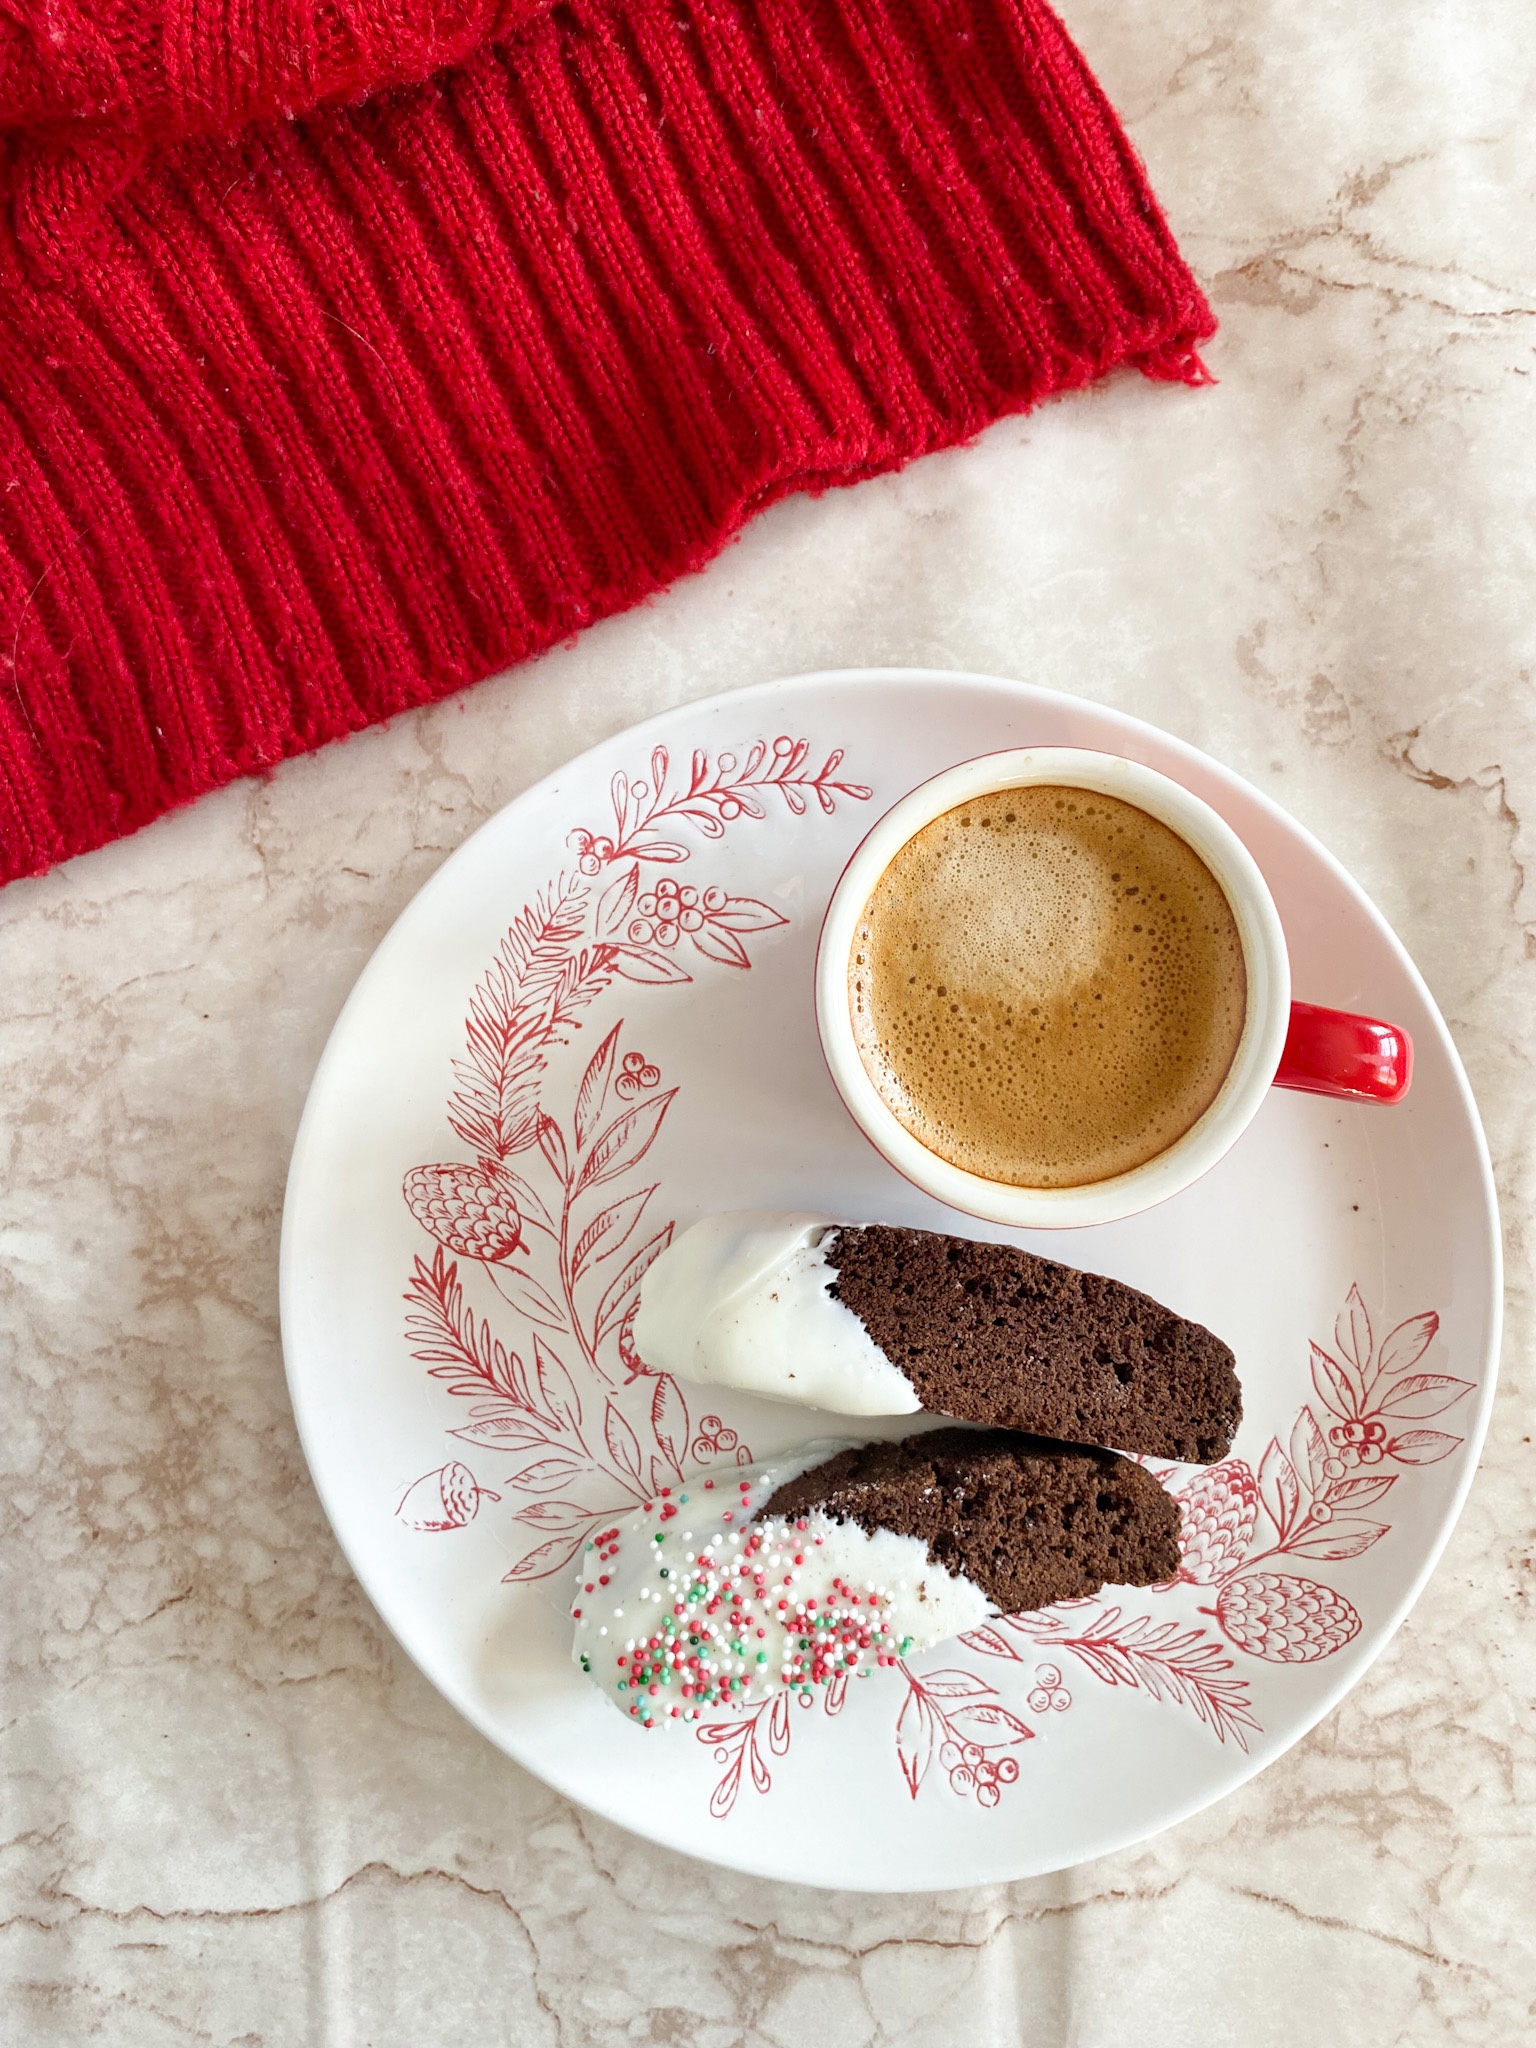 chocolate gingerbread biscotti dipped in white chocolate sit on a white plate with red holiday decor